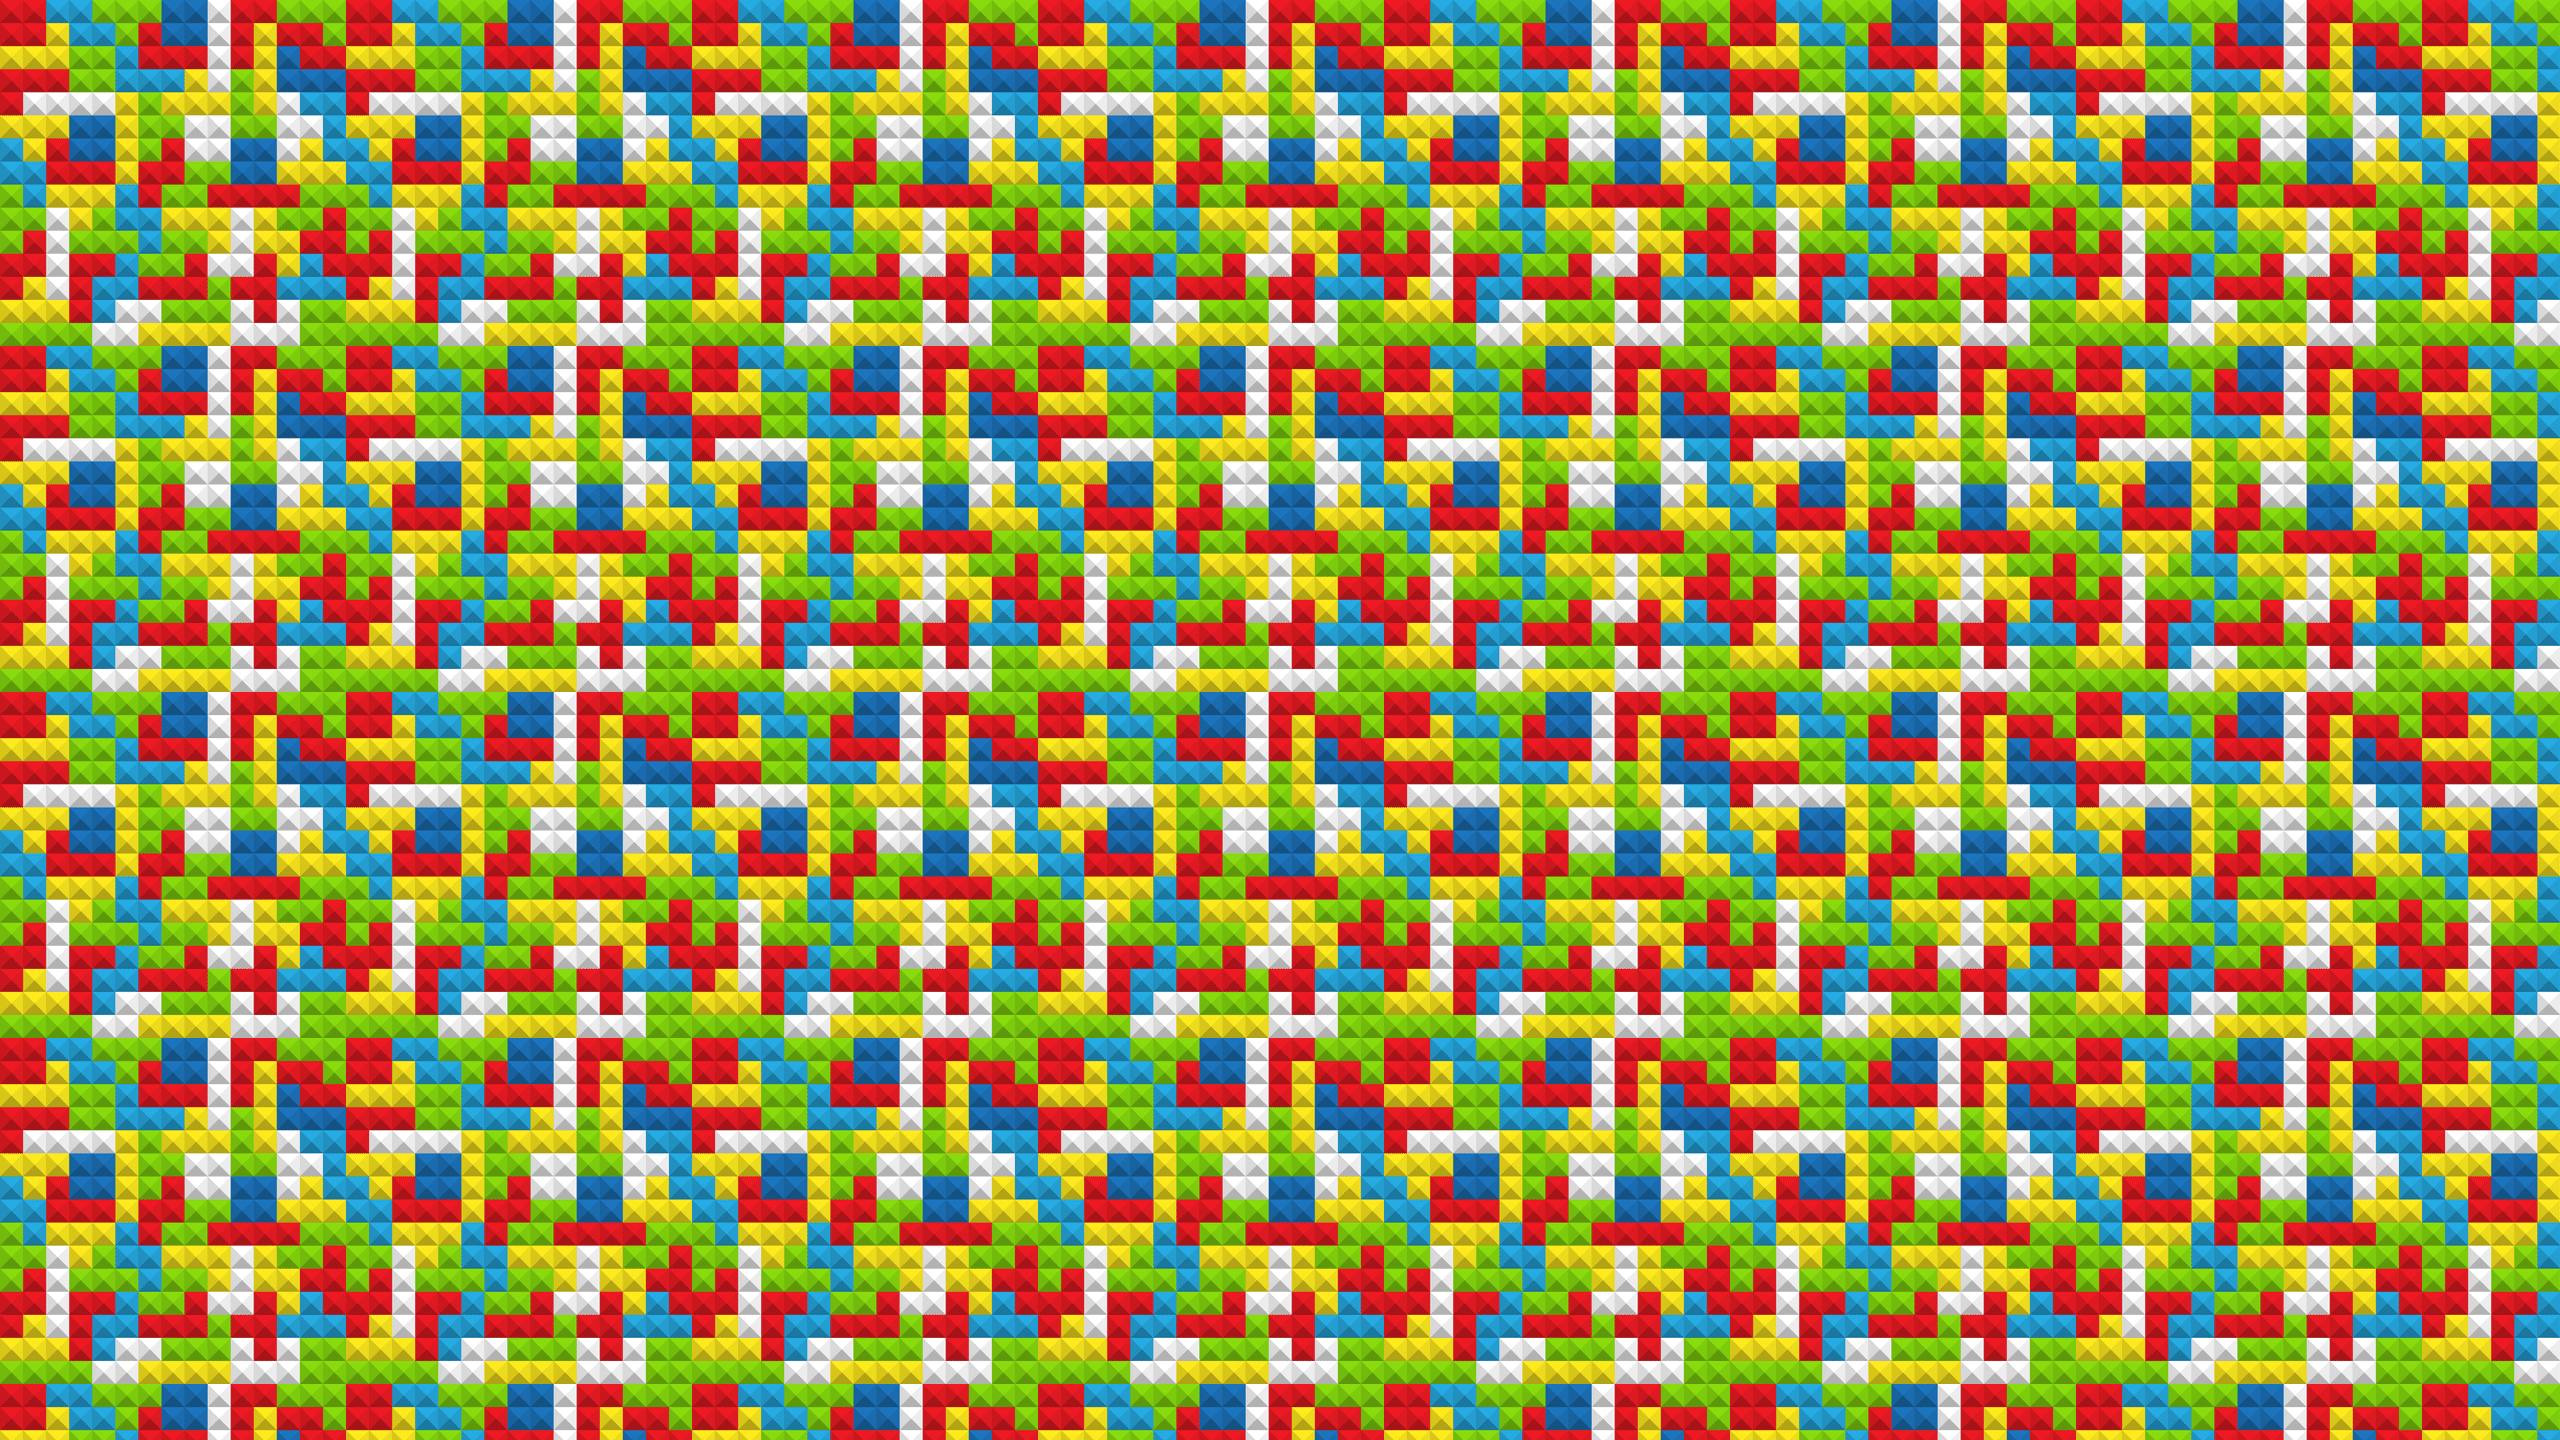 This Lego Tetris Desktop Wallpaper Is Easy Just Save The